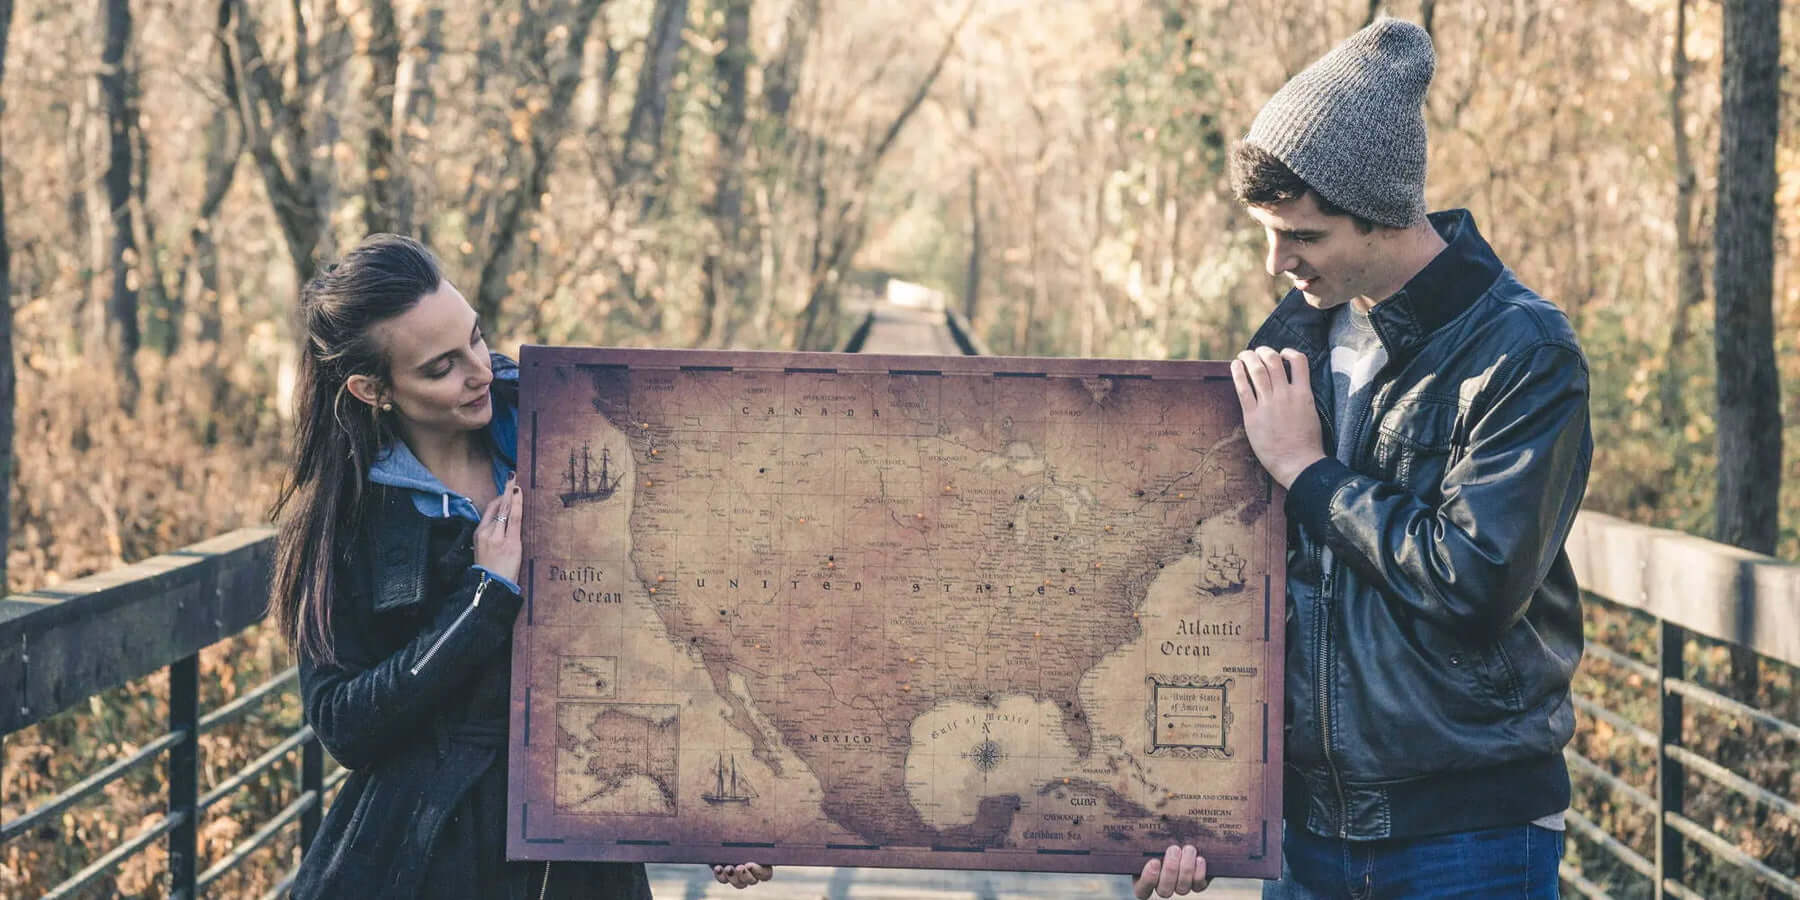 Pin Board Maps: A Unique Gift Idea for Travelers & Beyond